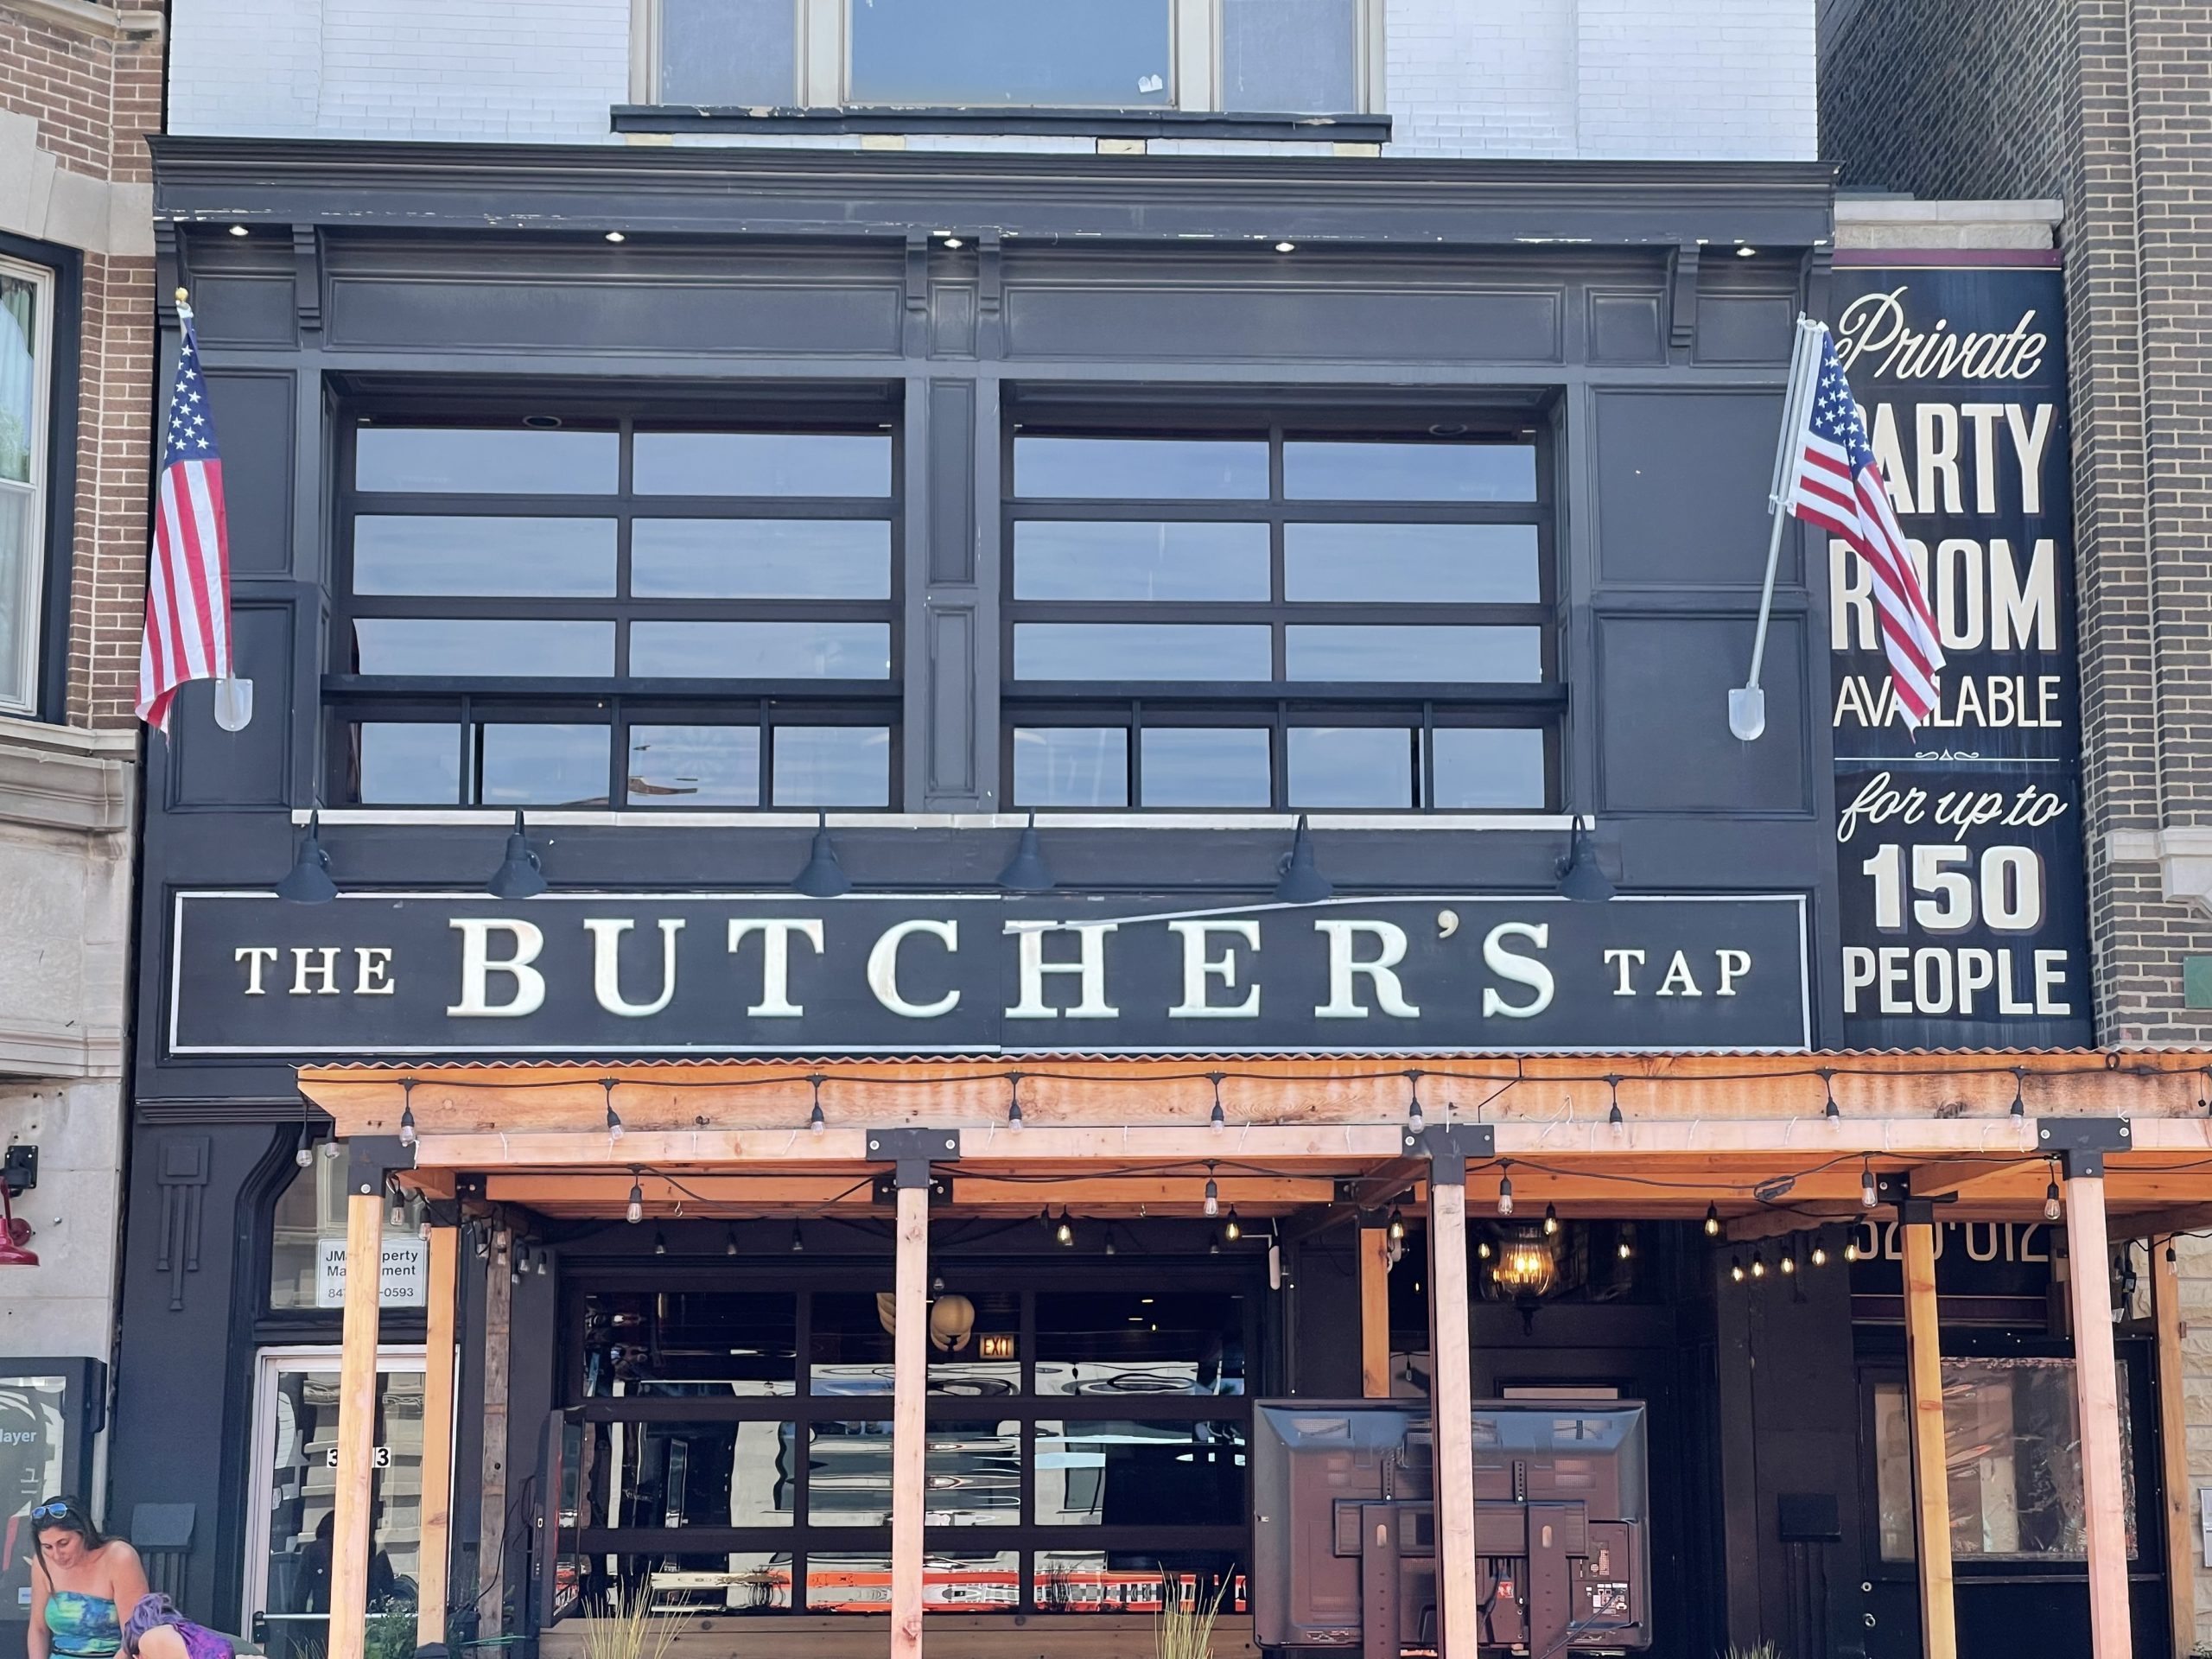 The Butcher’s Tap